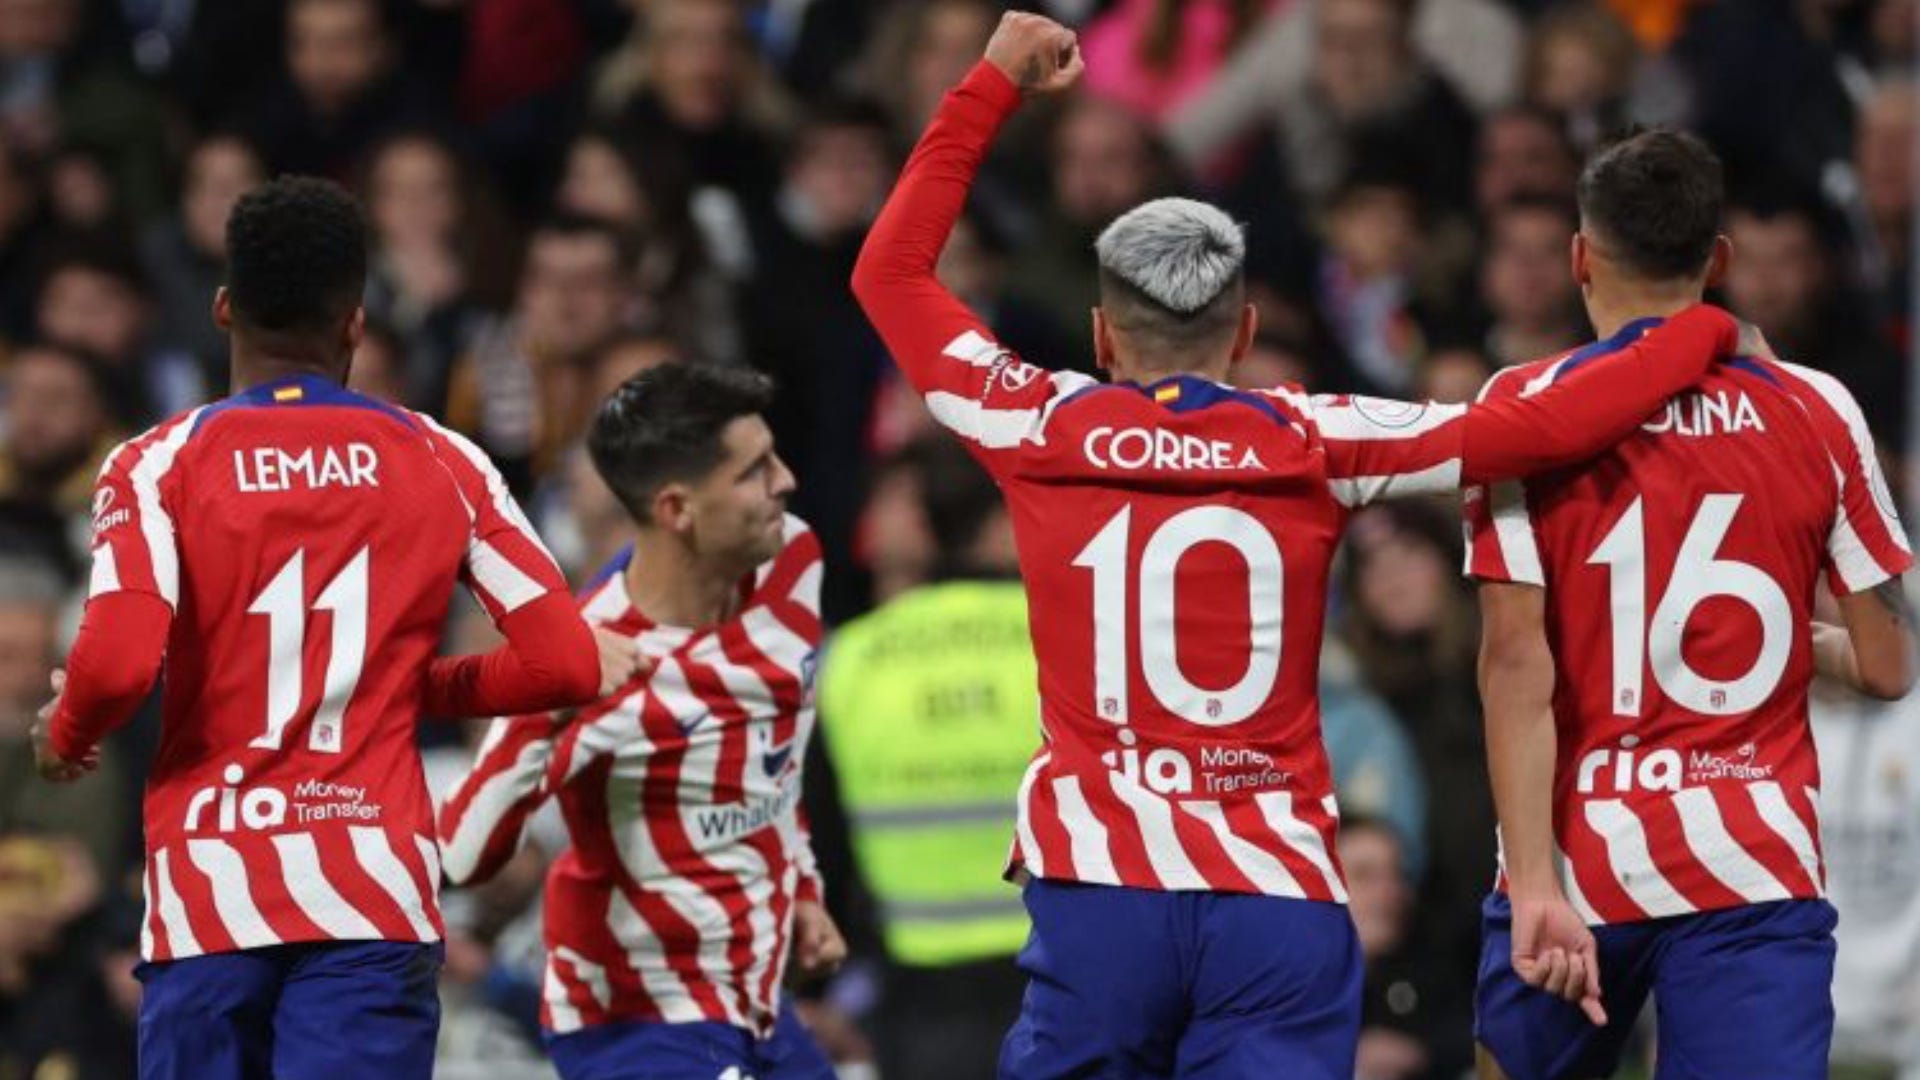 Atletico vs Athletic Club Live stream, TV channel, kick-off time and where to watch Goal